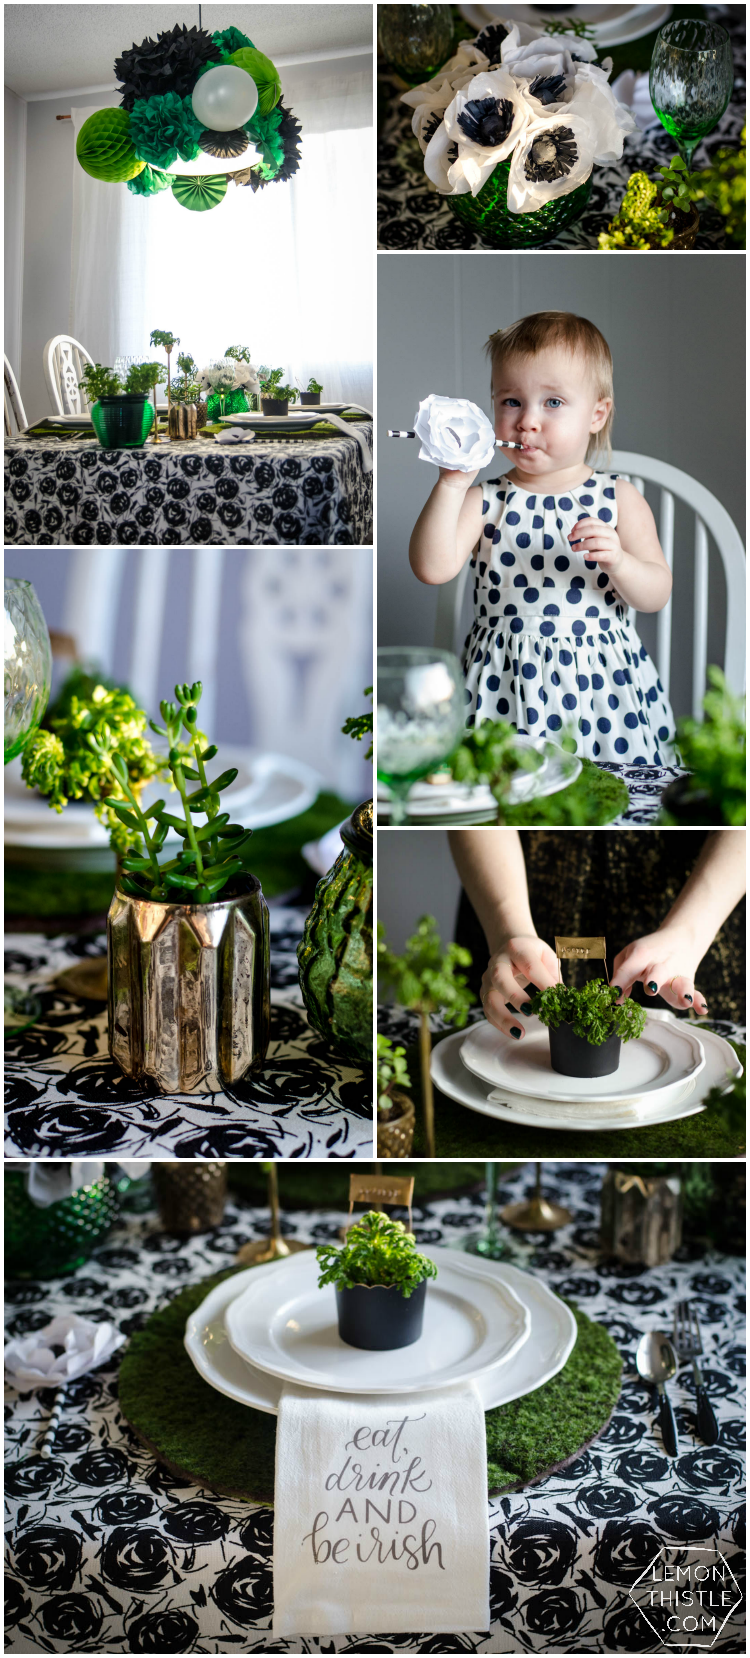 DIY your way to a classy Saint Patrick's Day Party!